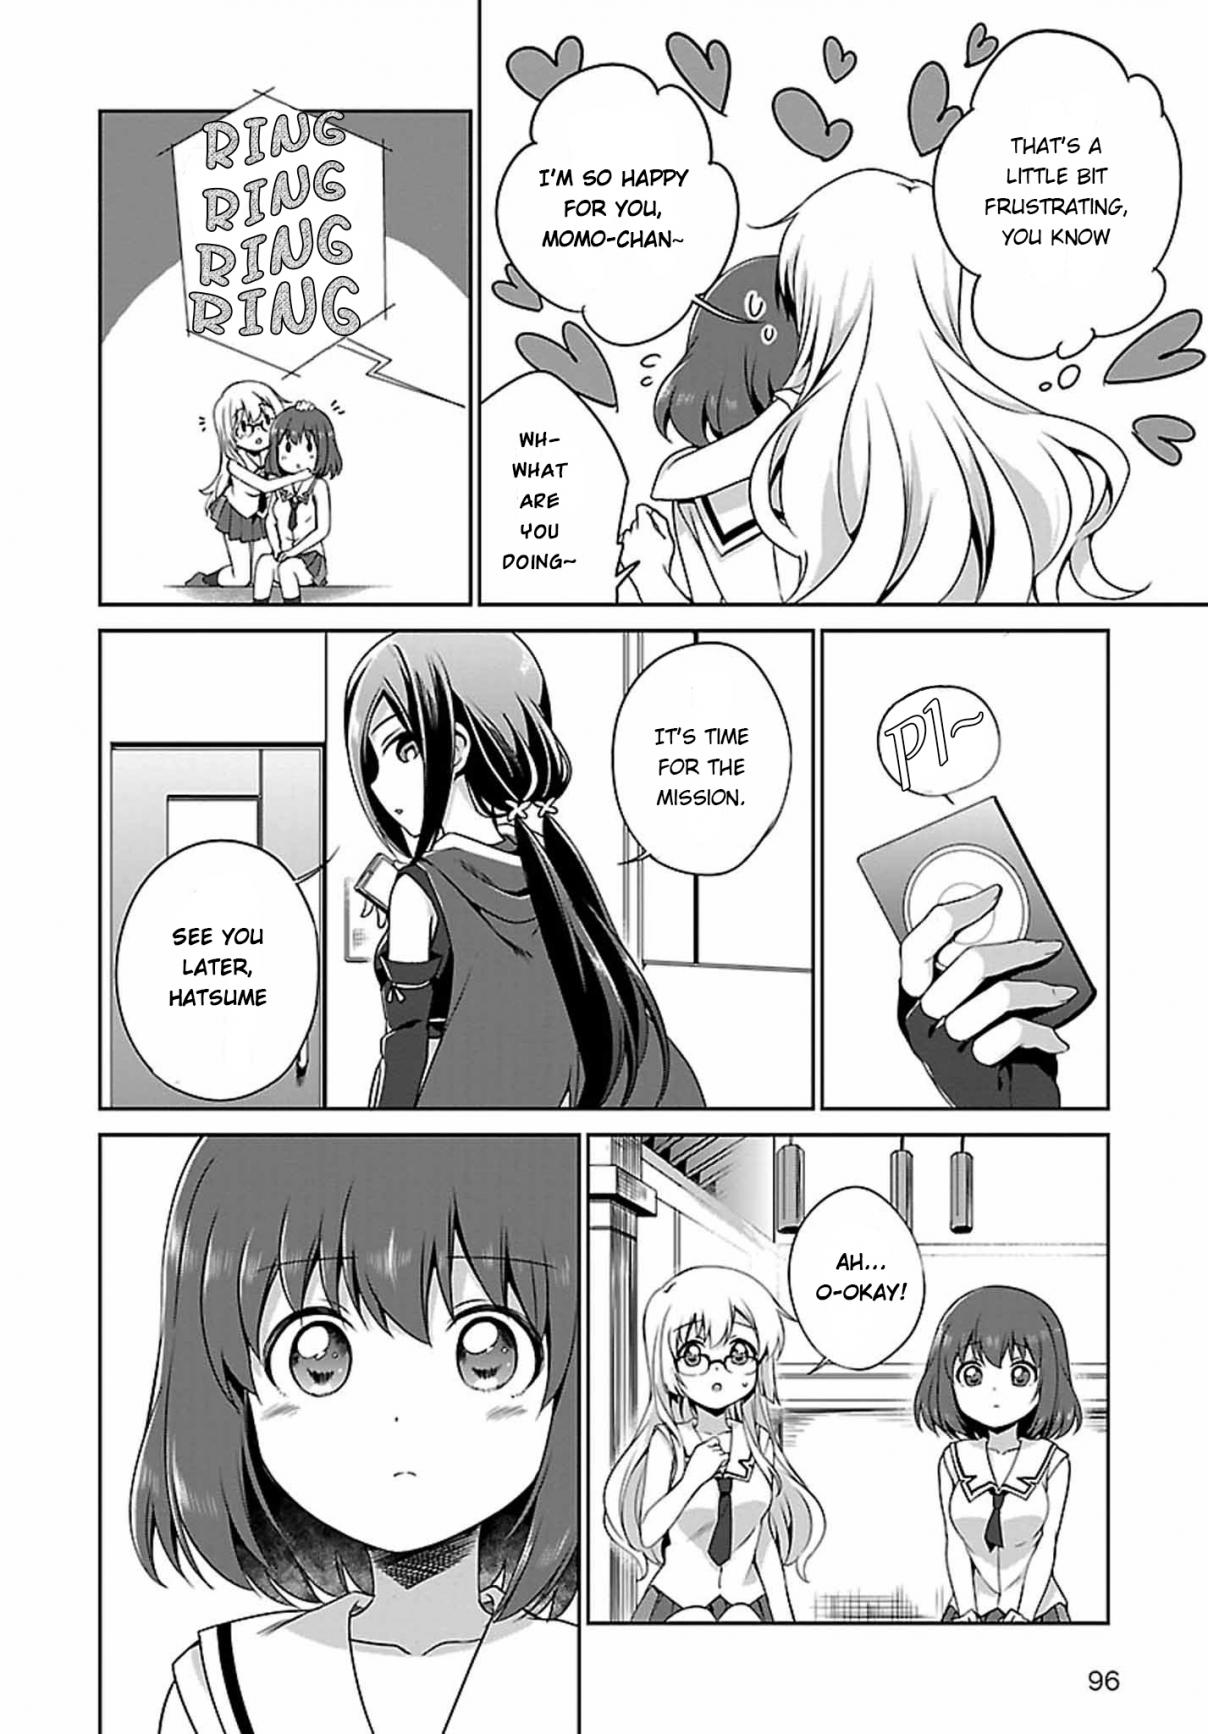 Release the Spyce Secret Mission Vol. 2 Ch. 7 Volume 2, Chapter 7